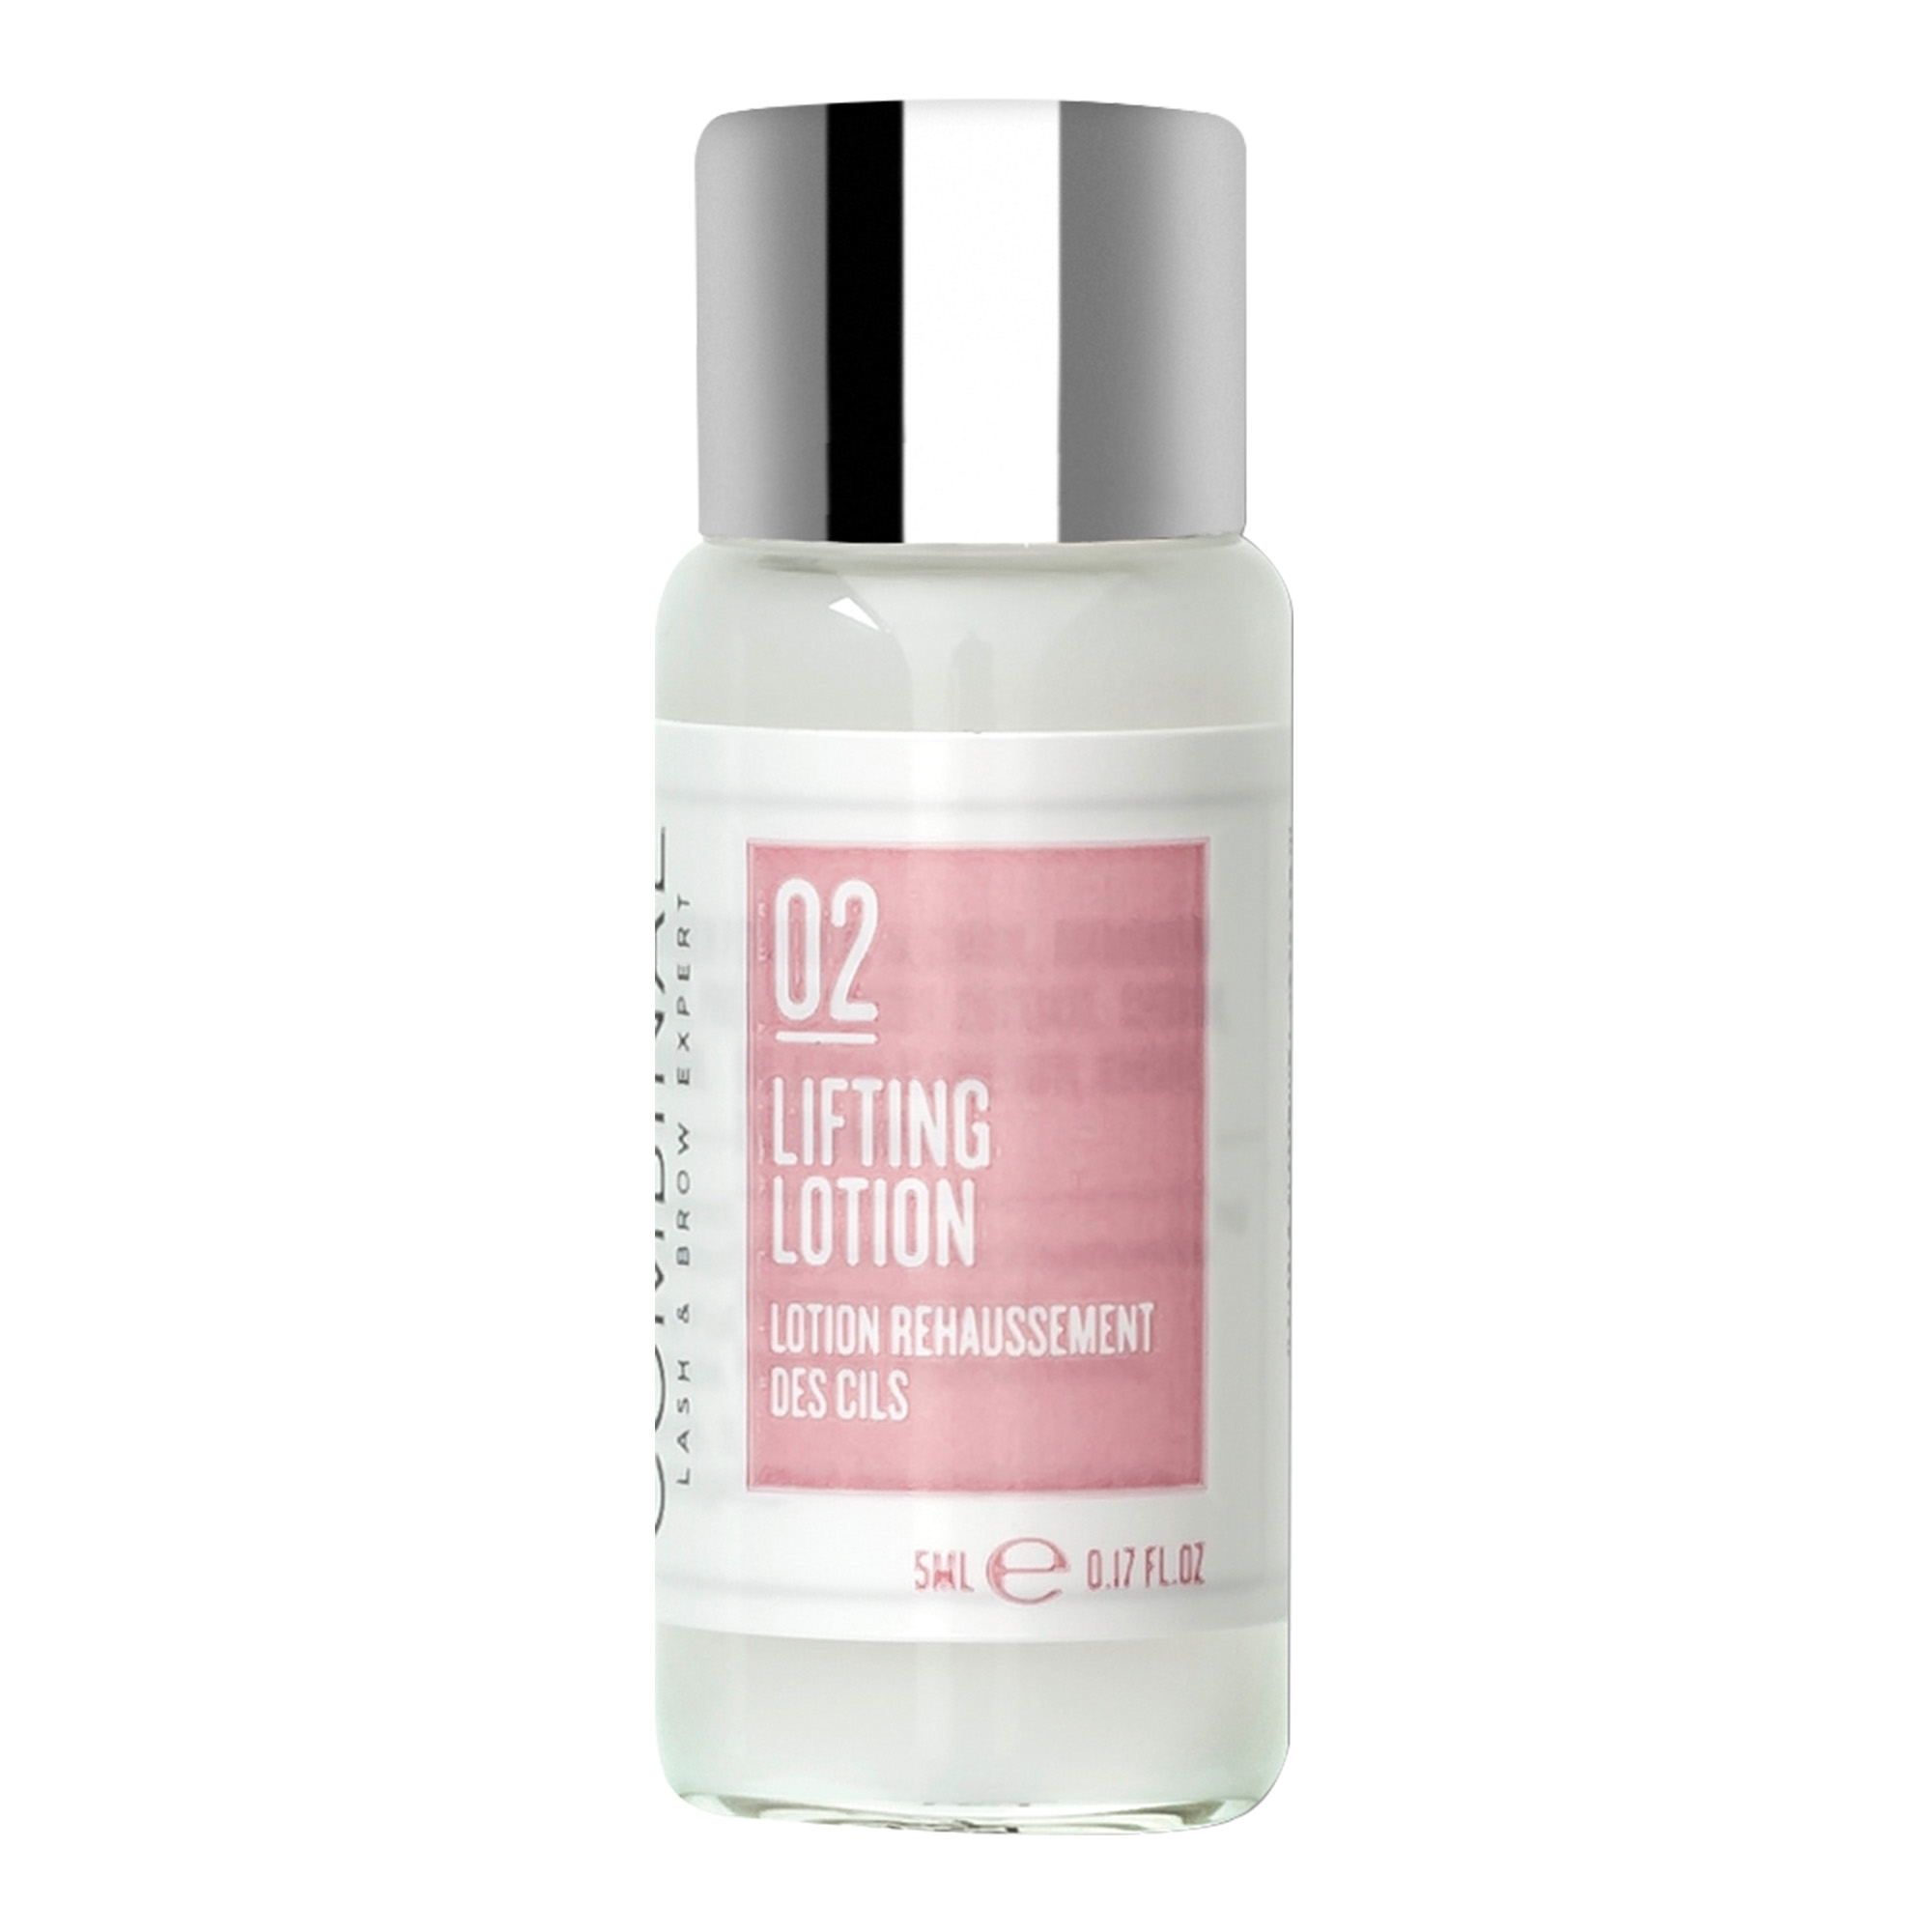 Wimpern Lifting Lotion 5 ml